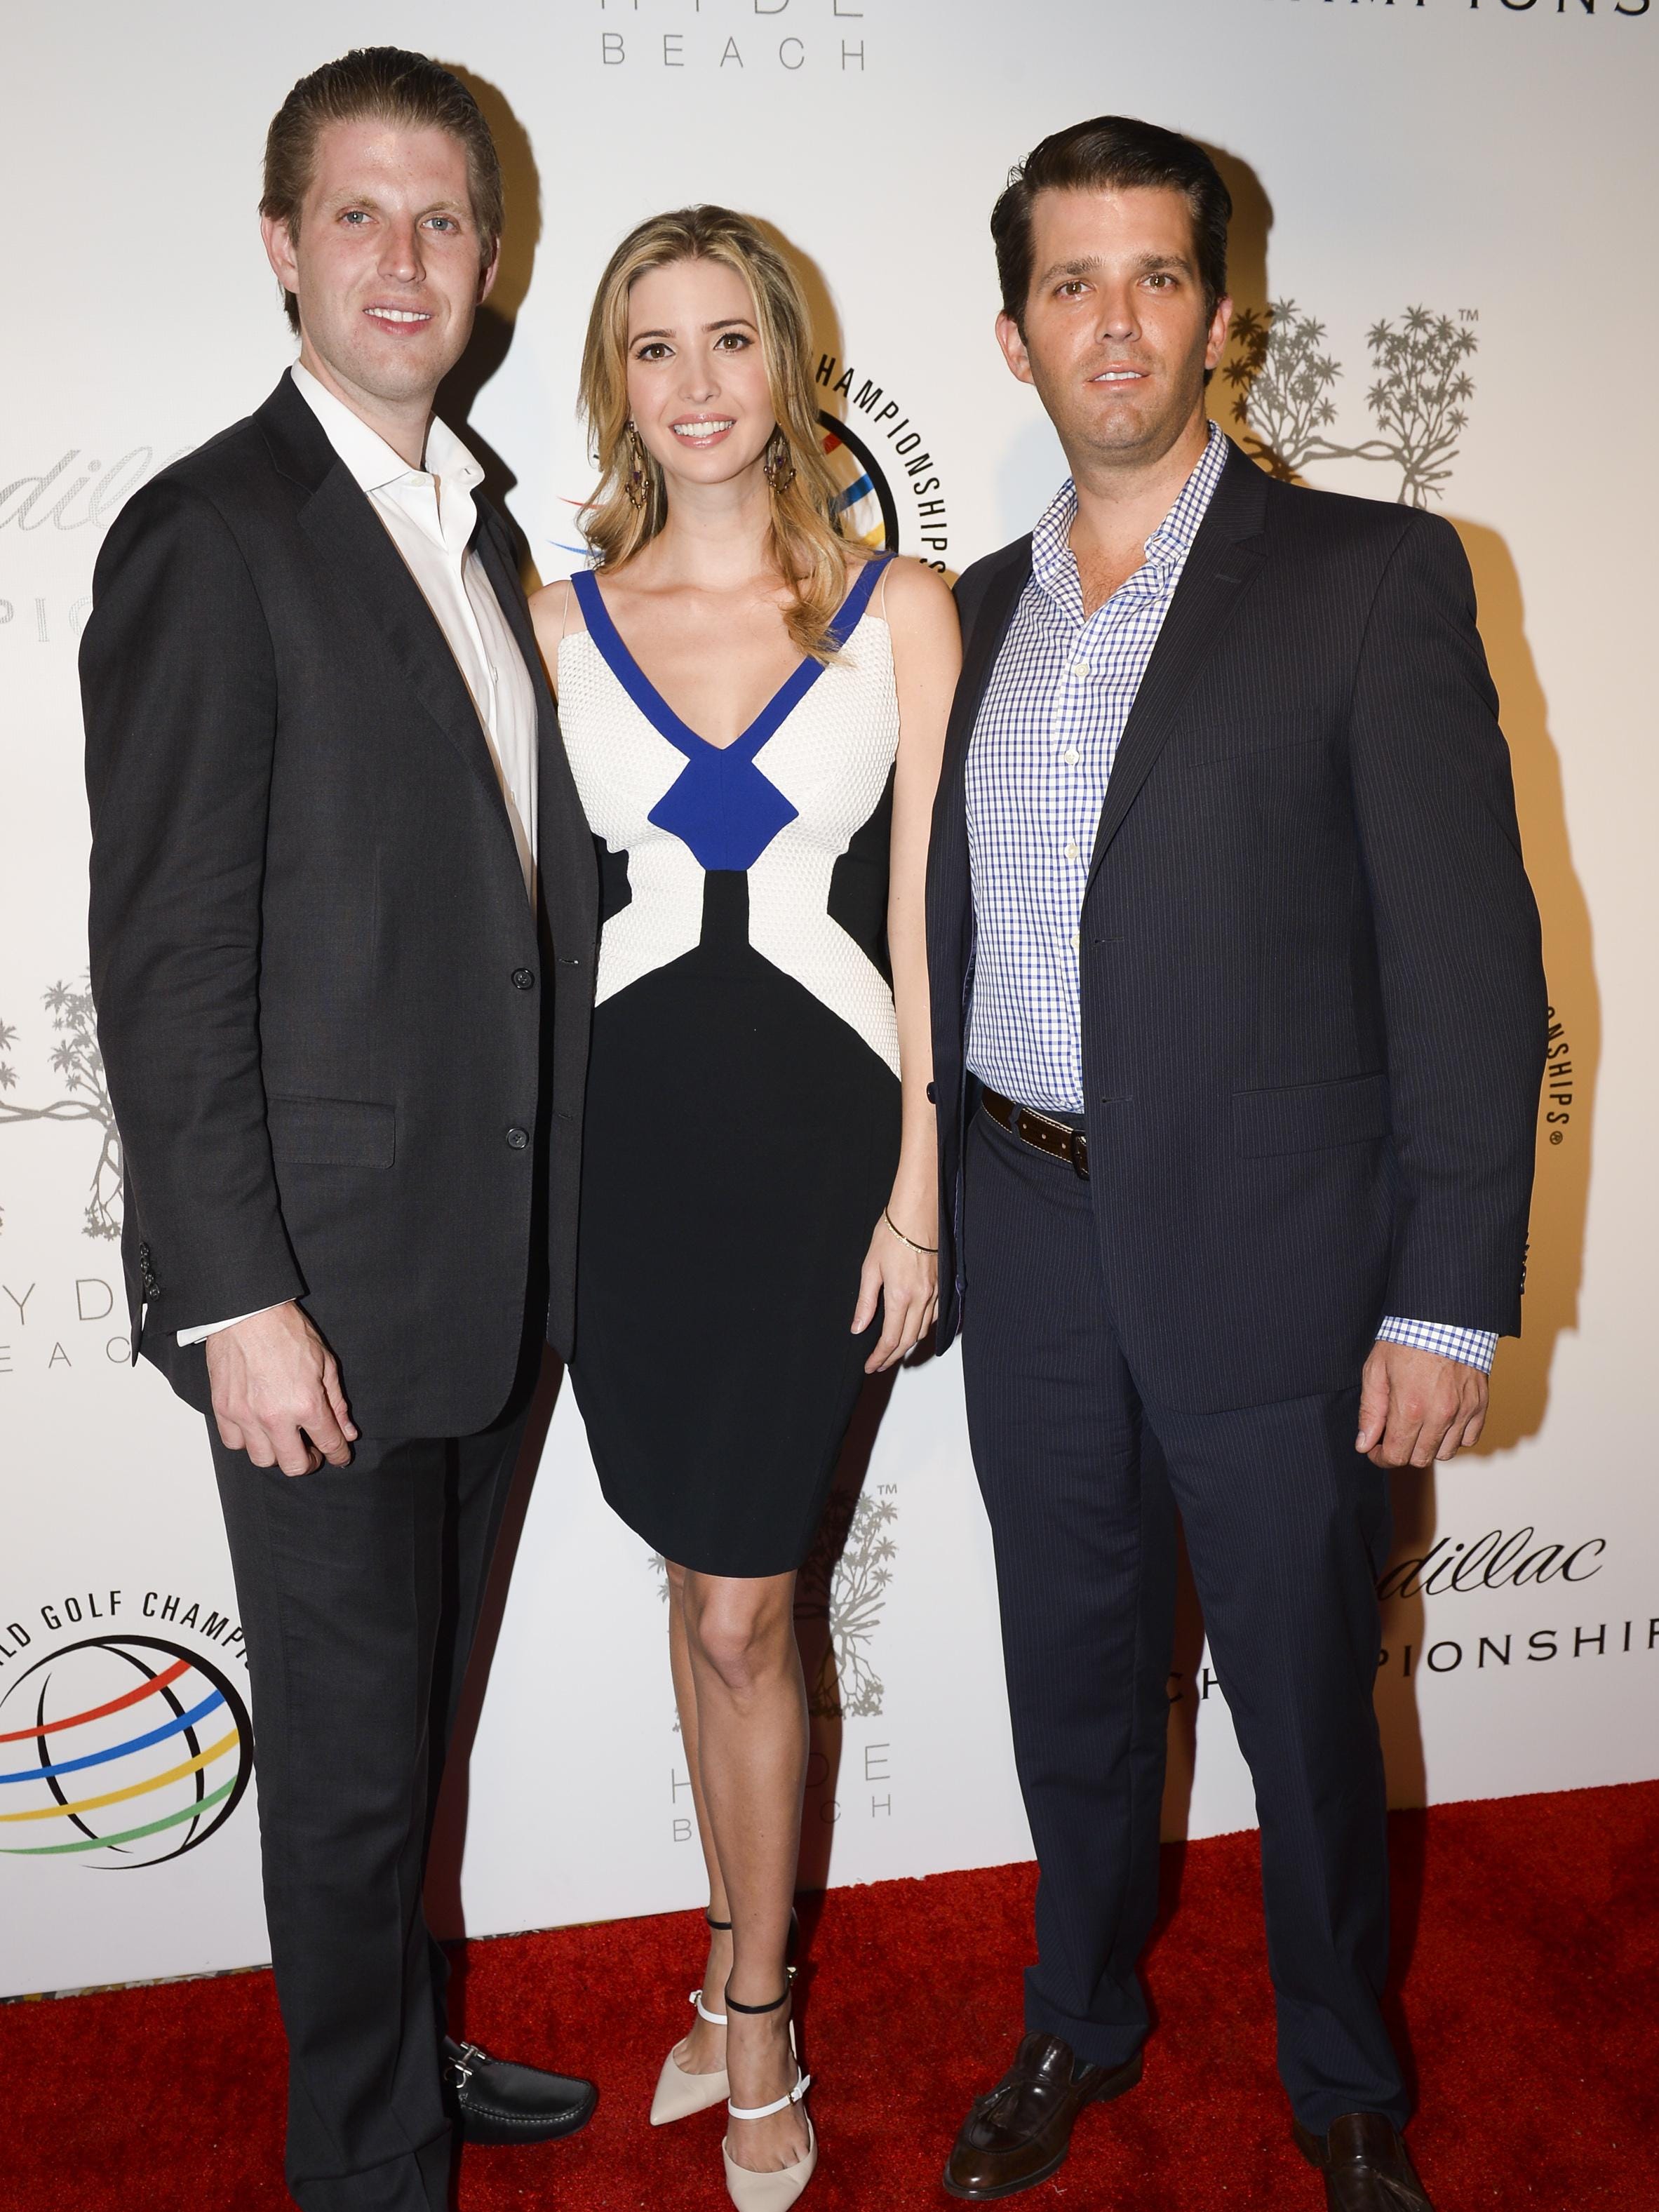 Eric Trump, Ivanka Trump, and Donald Trump, Jr. attend The Opening Drive Party at Hyde Beach on March 4, 2014 in Miami, Florida.